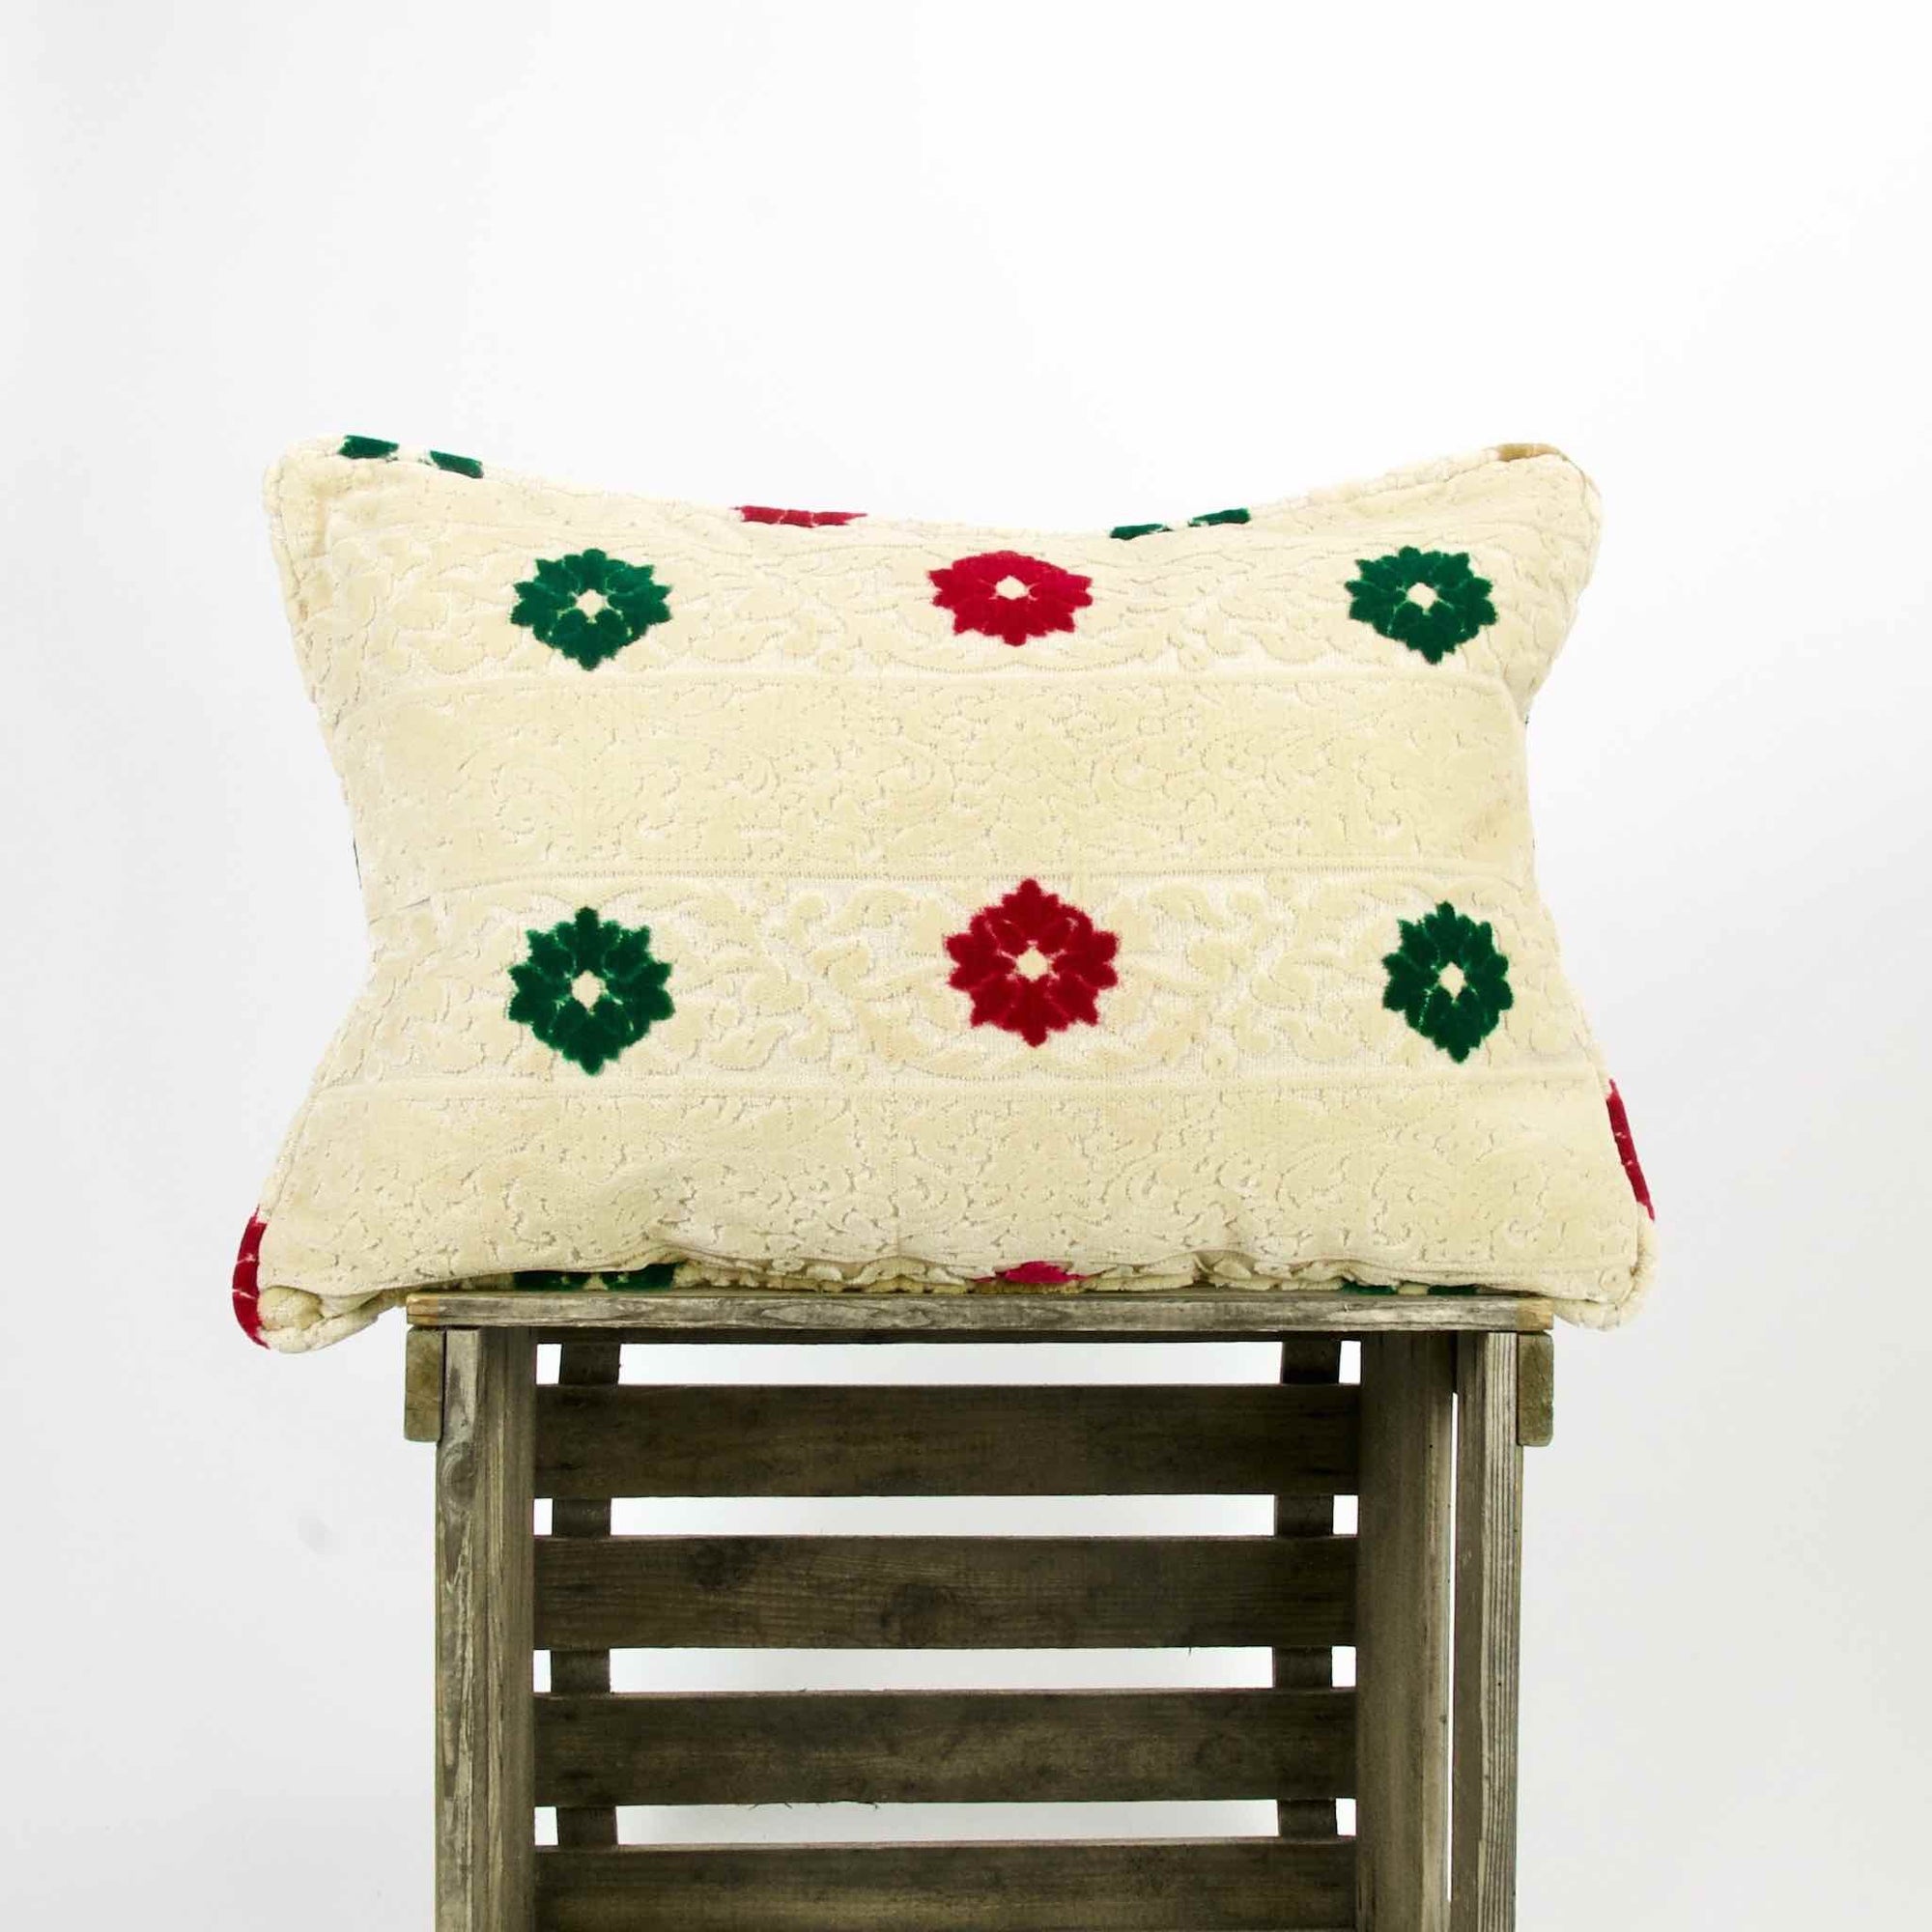 Beige Velvet Fluffikon sofa pillow with red and green flowers on a wooden box.